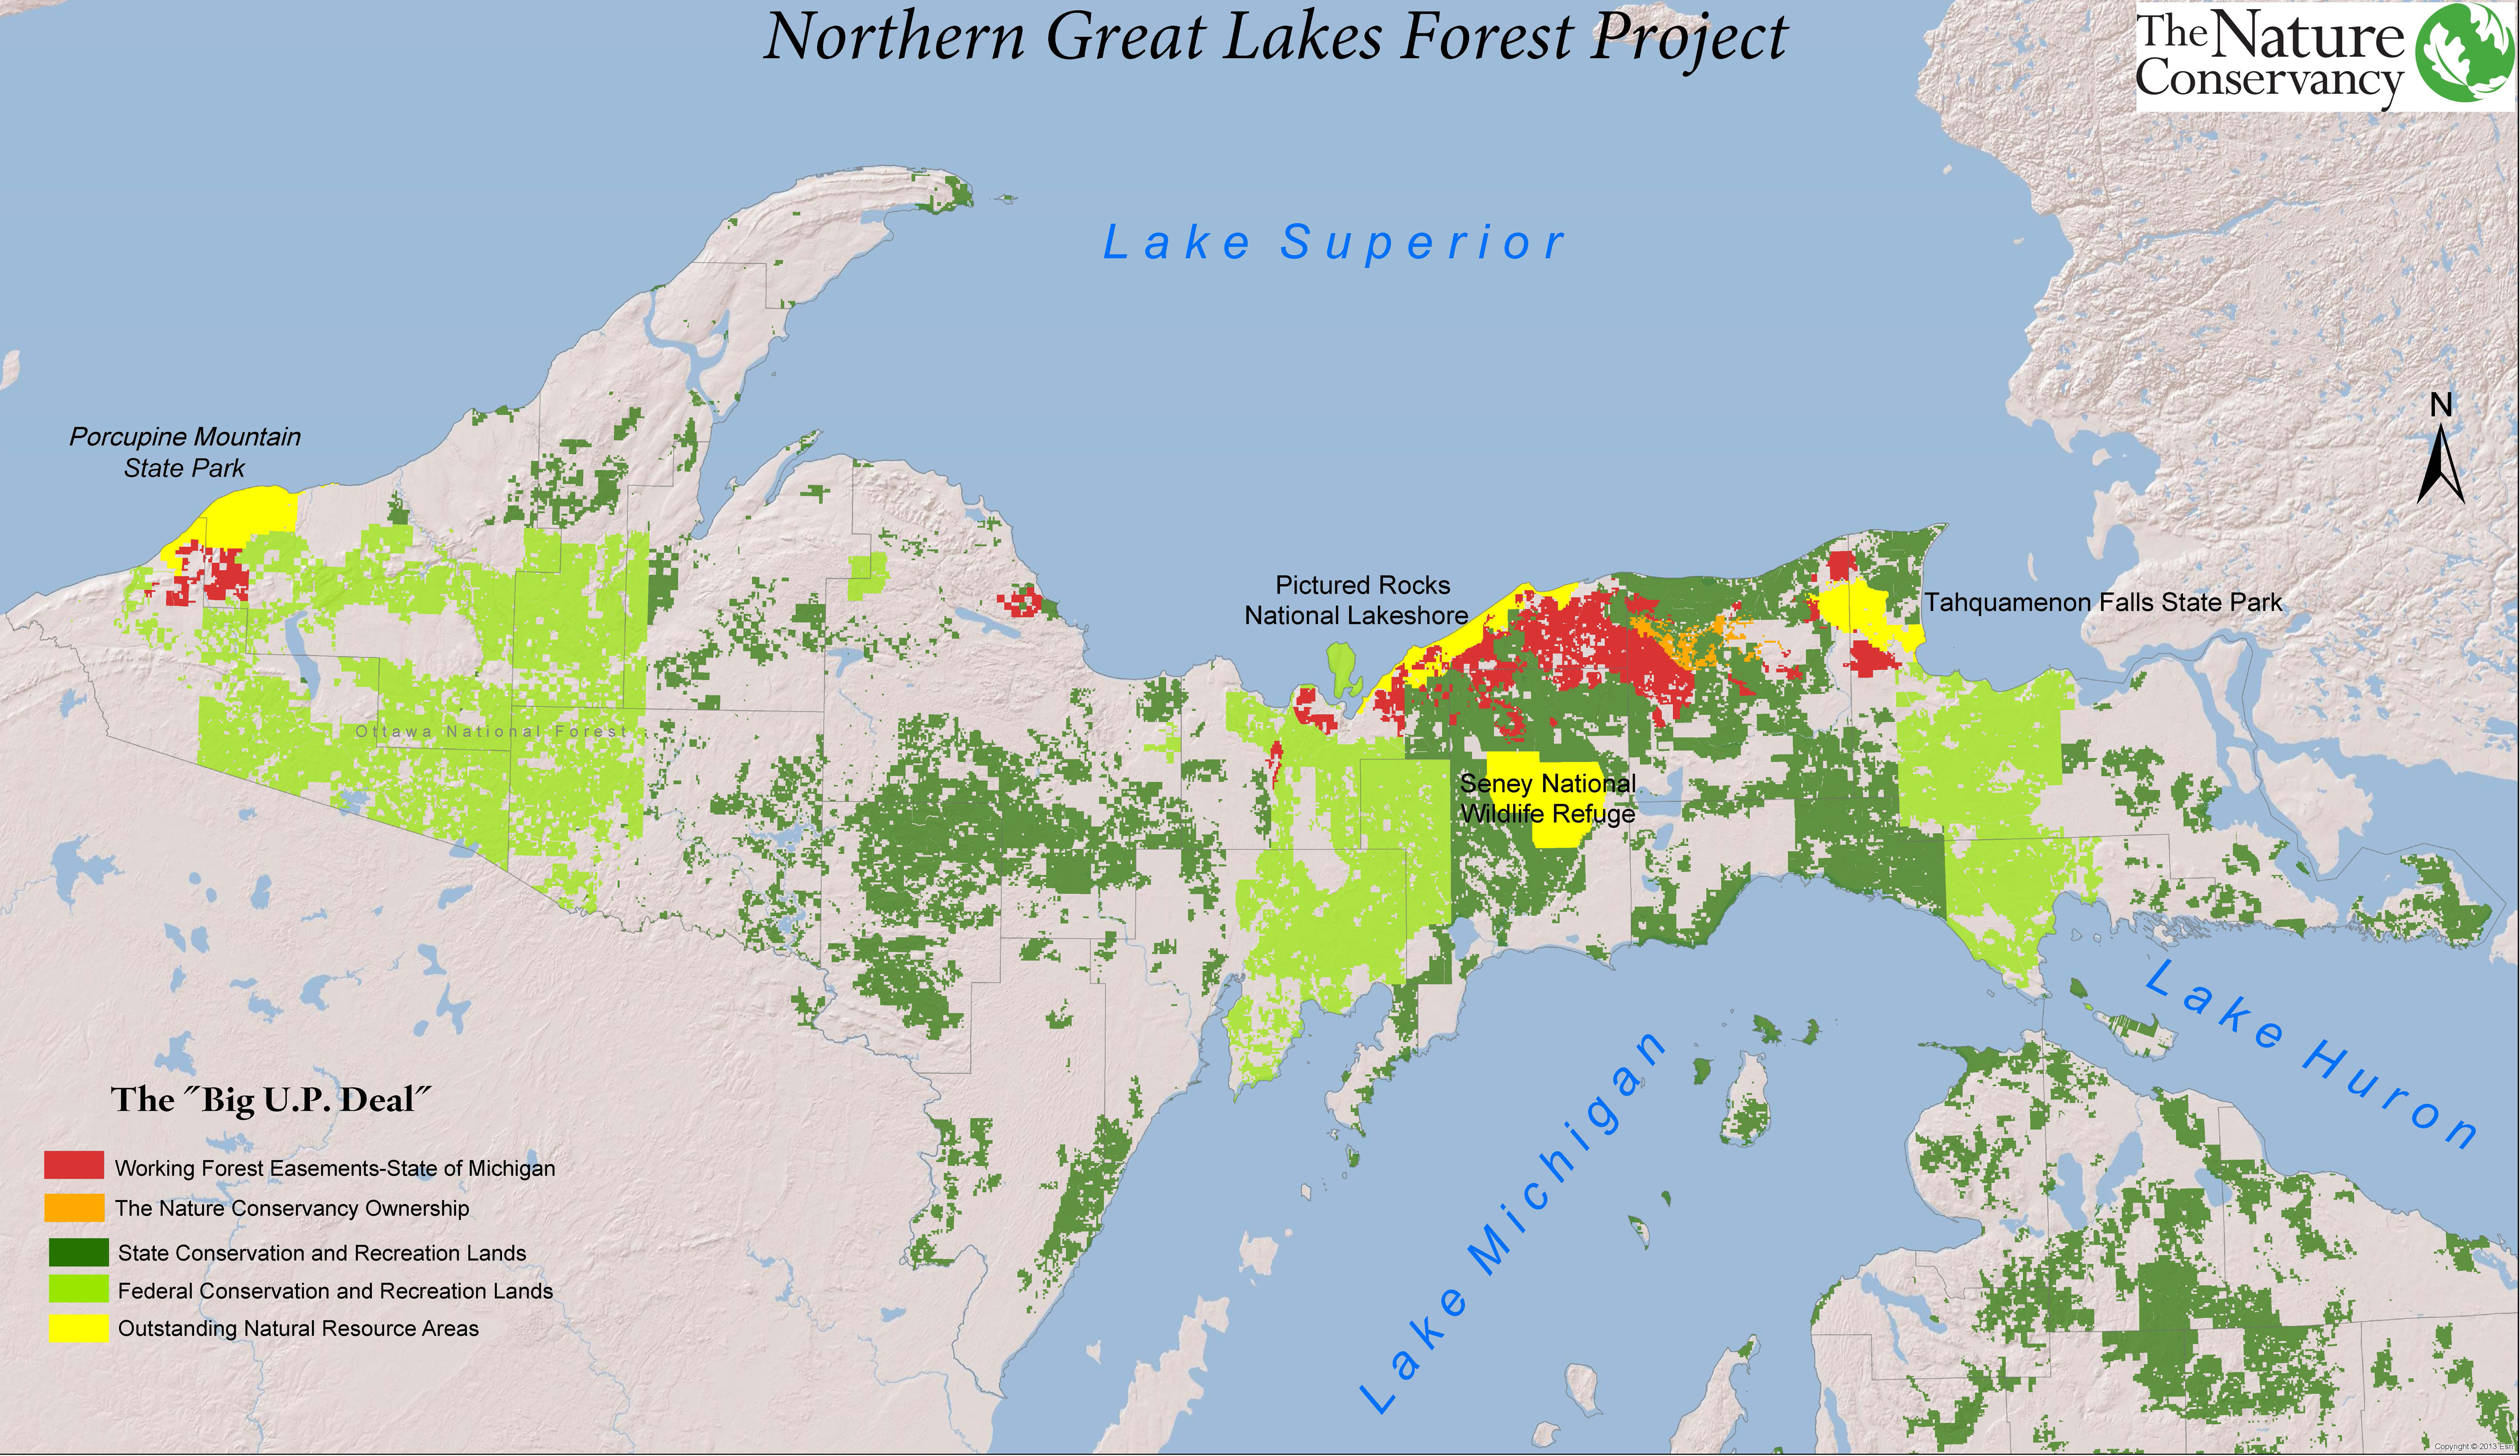 A map outlining the areas impacted by the Northern Great Lakes Forest Project.